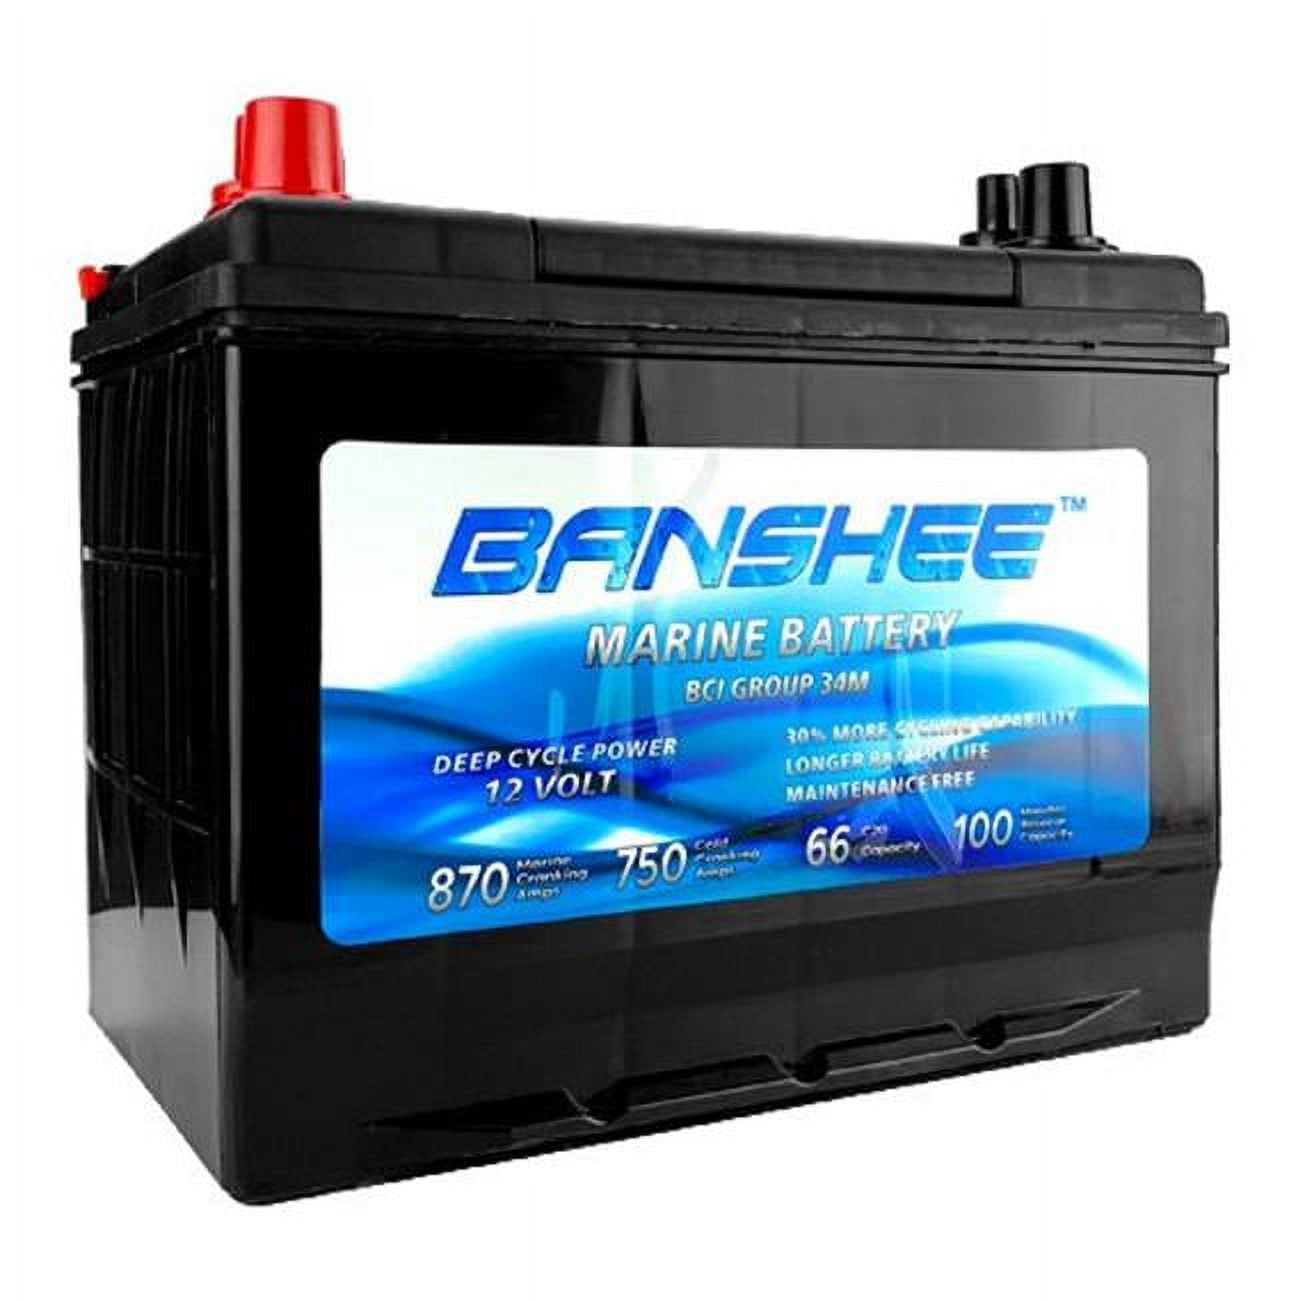 Picture of Banshee 34M-Banshee-01 Marine Starting Battery for Replacement 8006-006 SC34M - Group Size 34